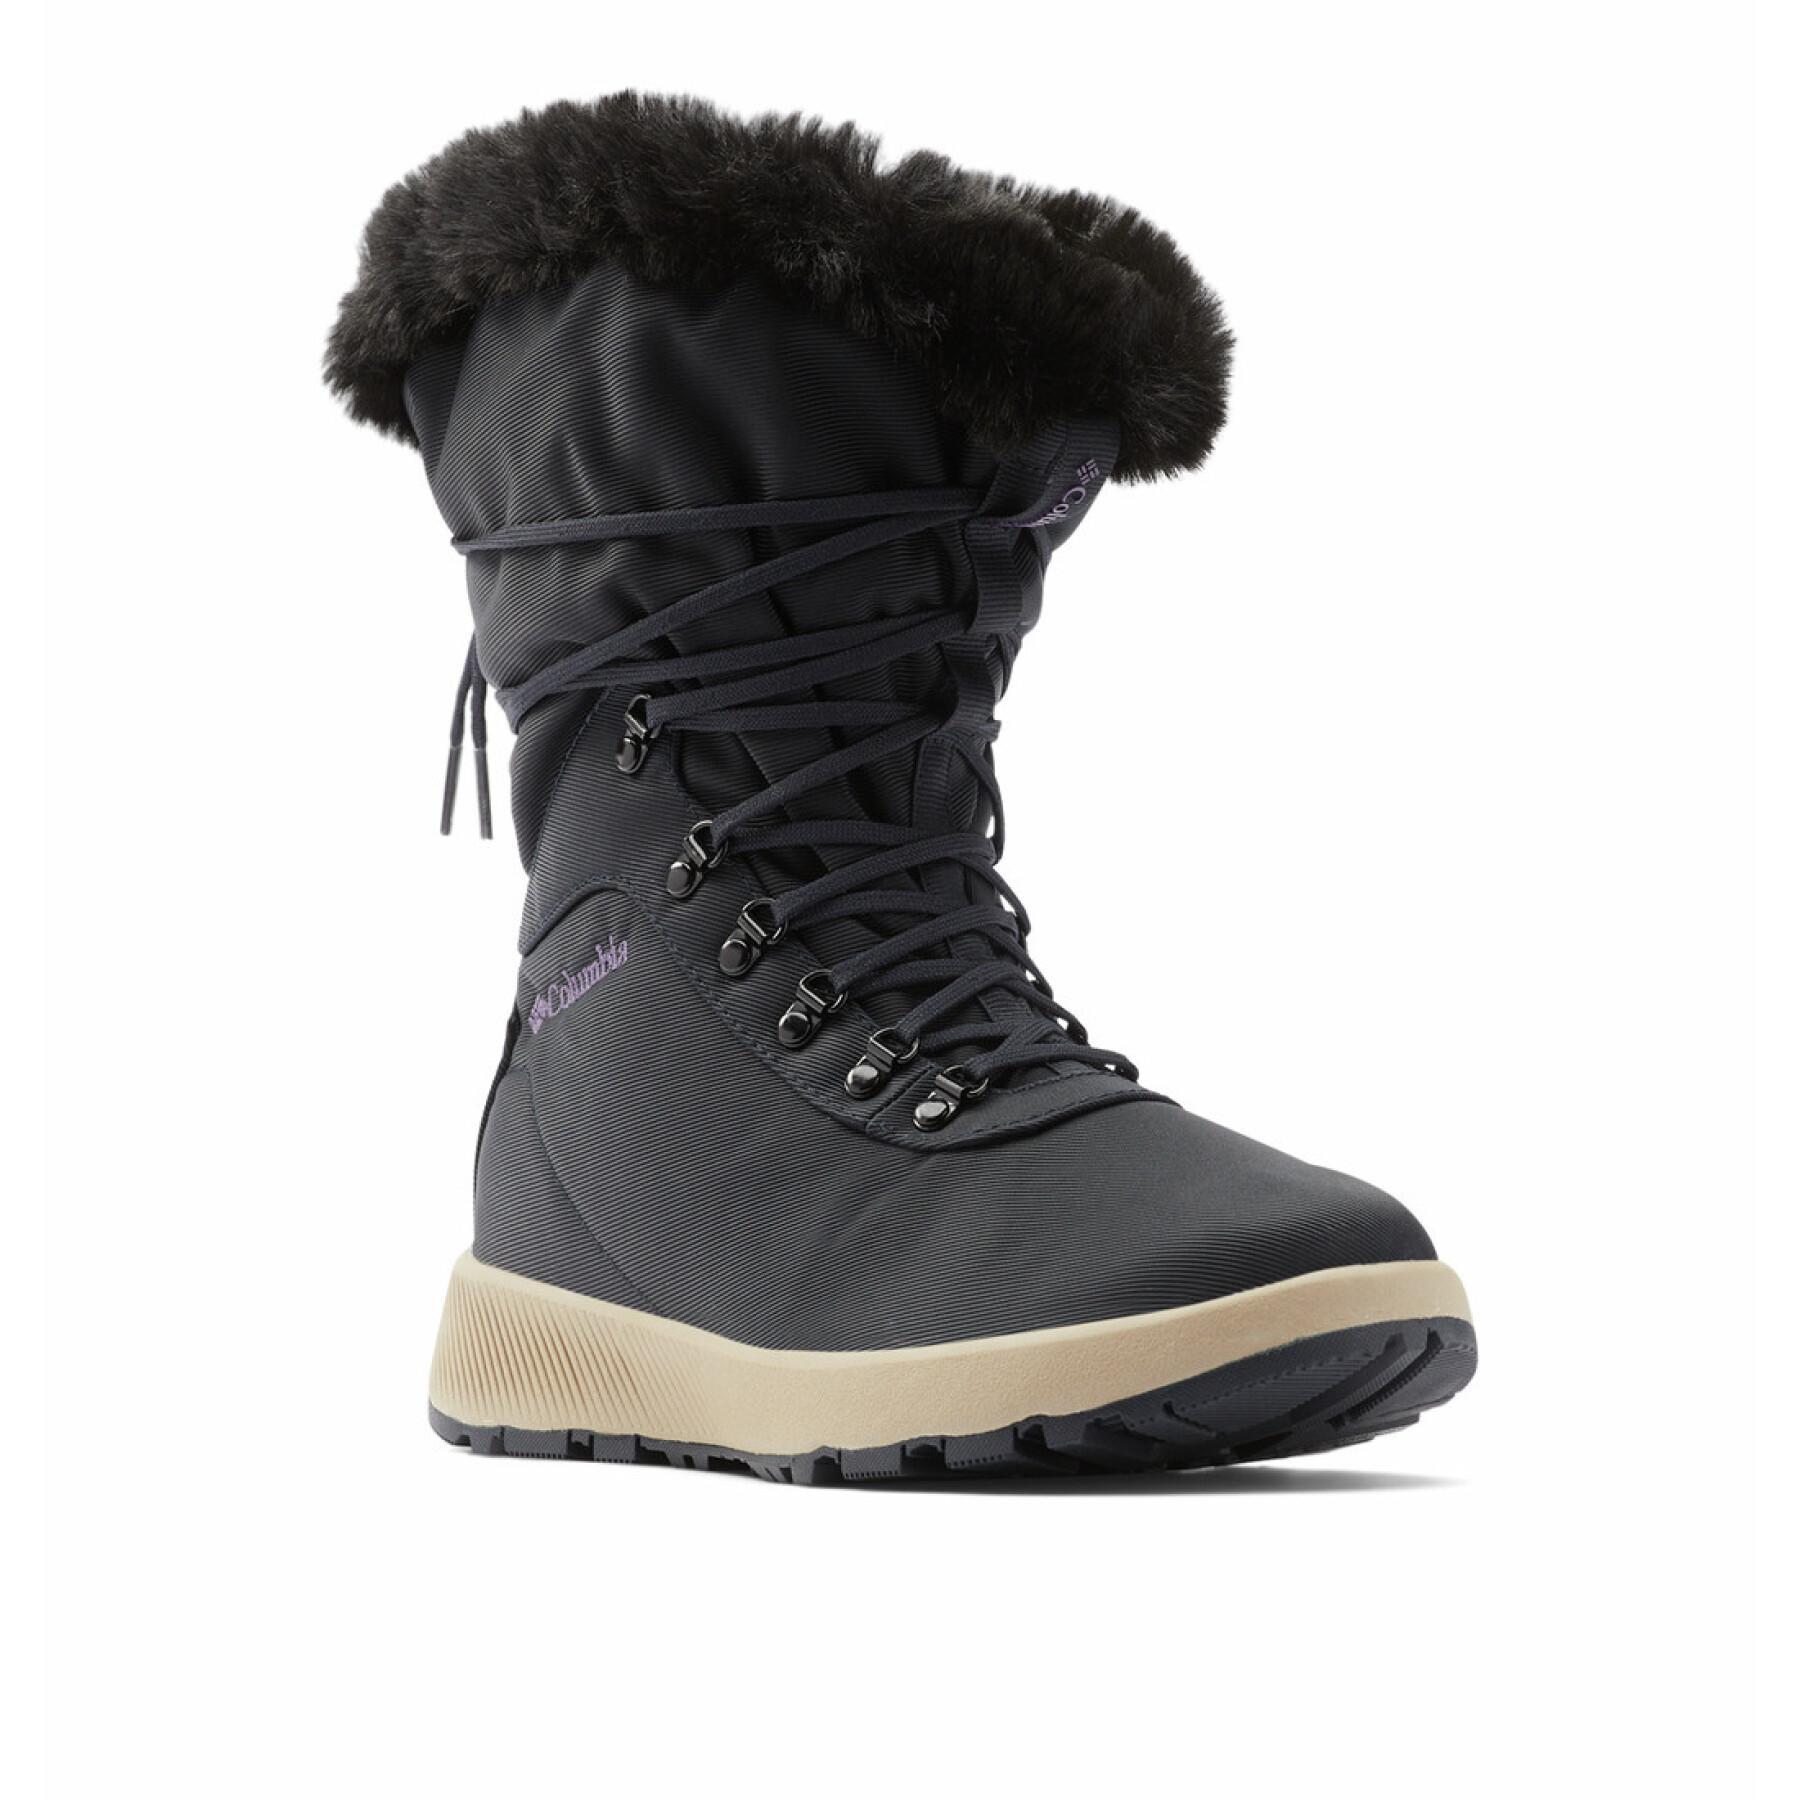 Chaussures femme Columbia Slopeside Village